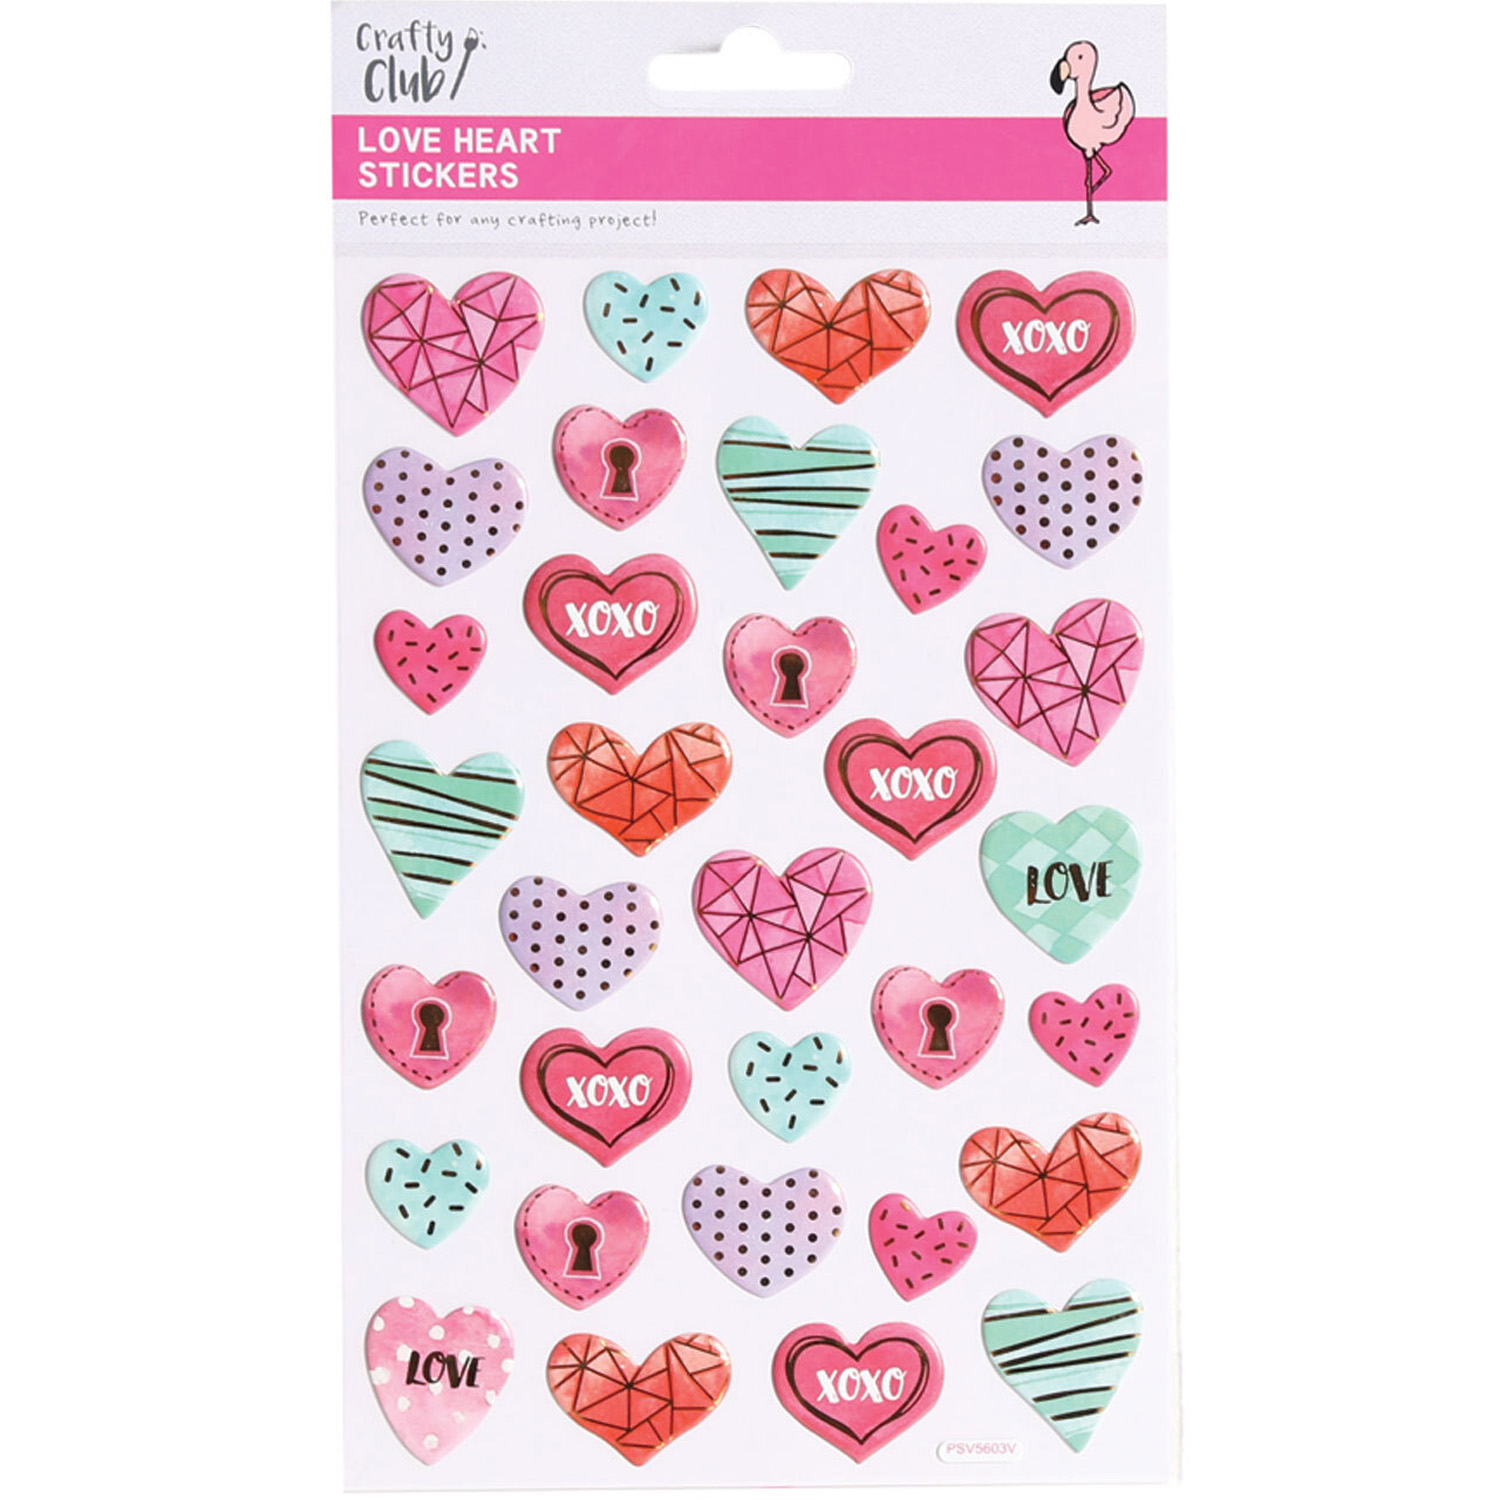 Love Heart Stickers Image